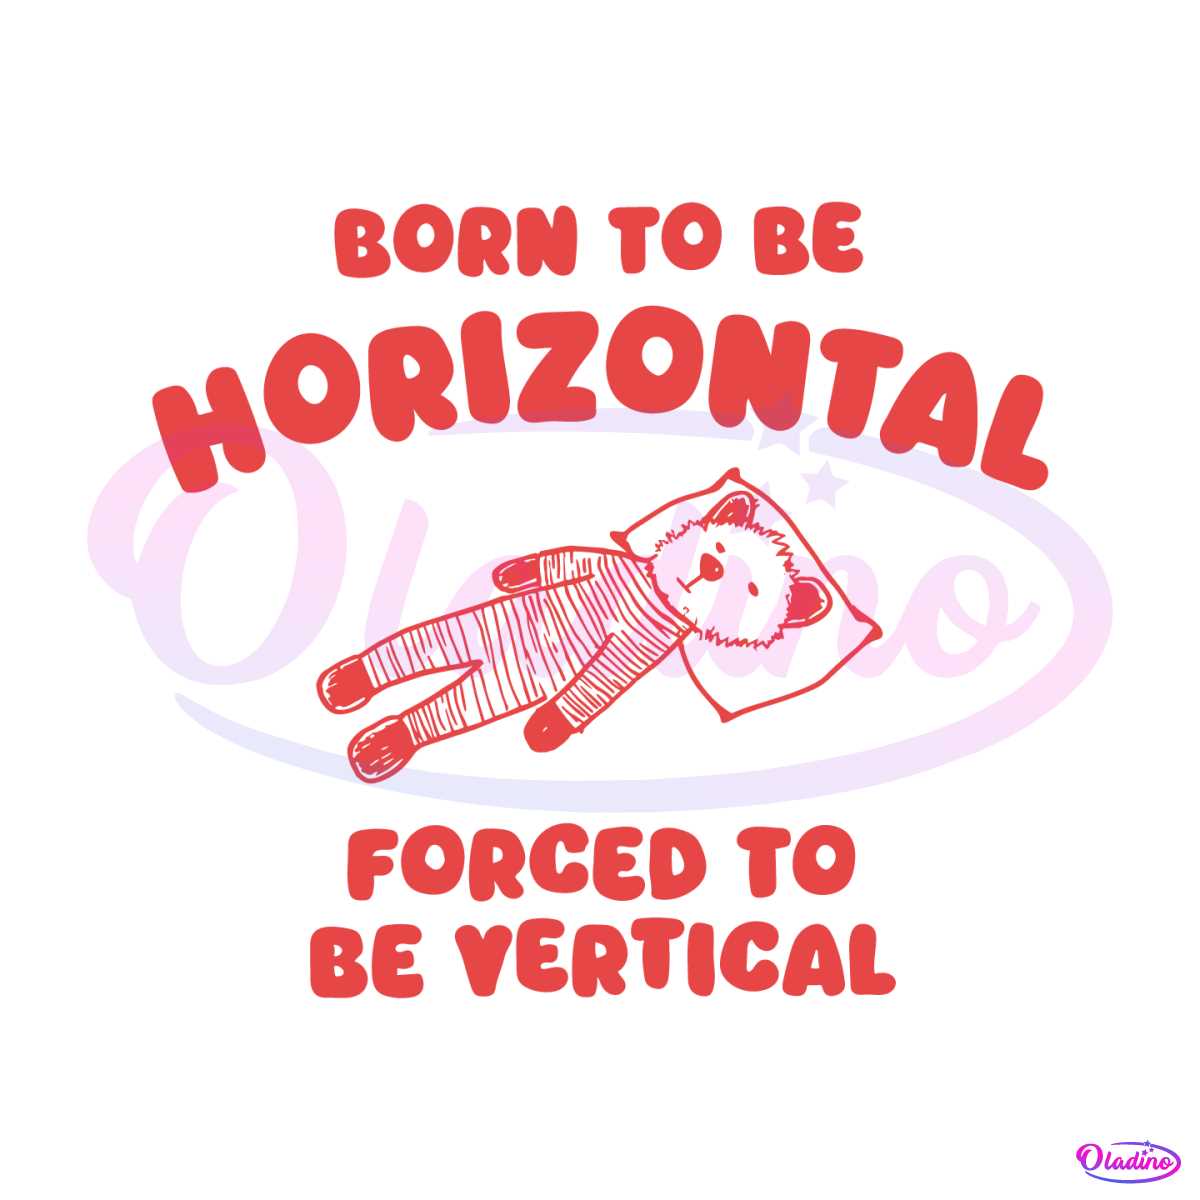 born-to-be-horizontal-forced-to-be-vertical-svg